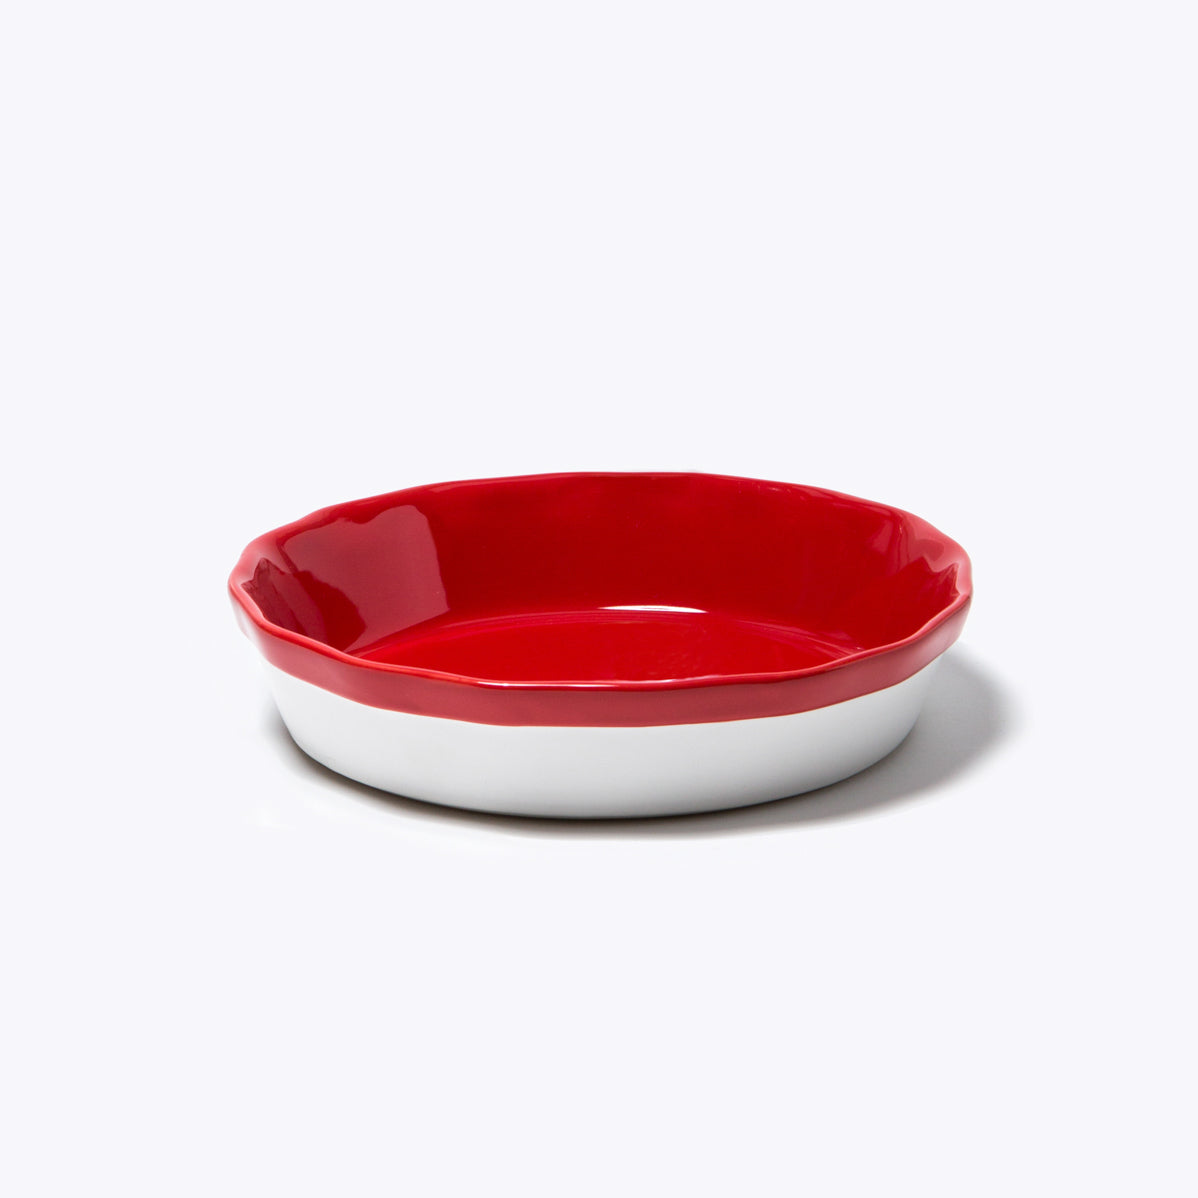 Image of Heirloom Fluted Pie Dish, 1.75QT